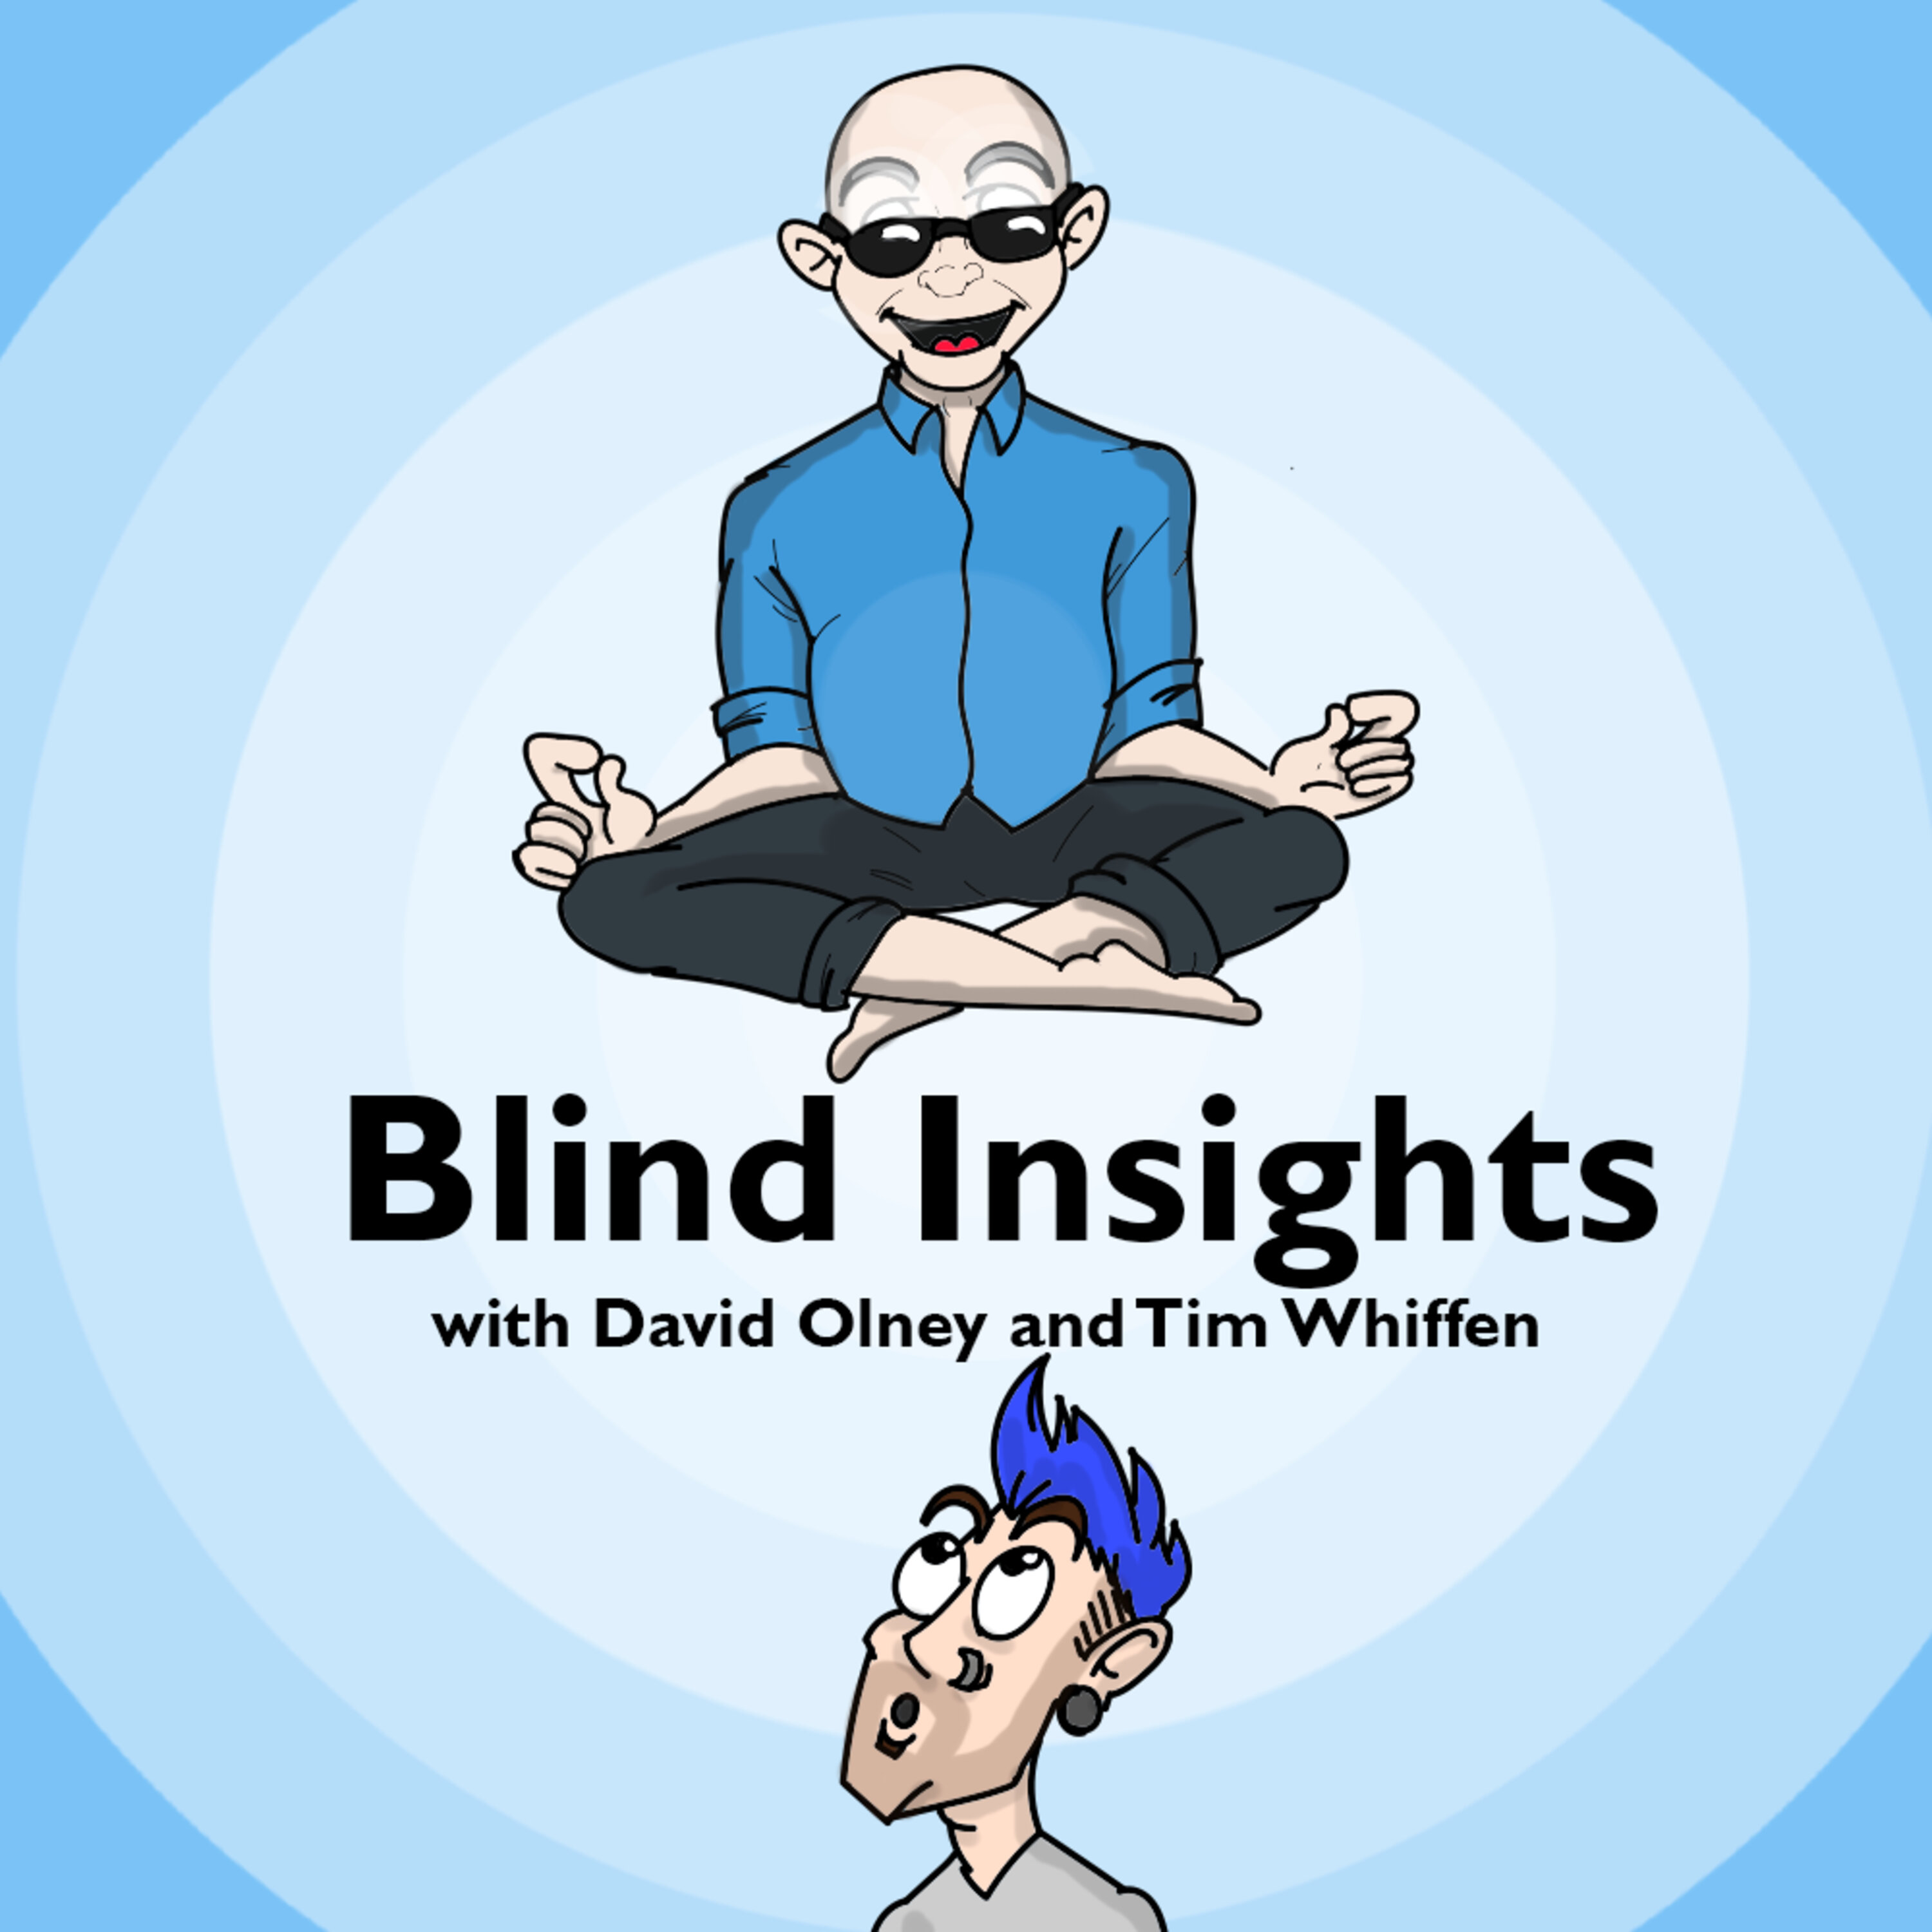 Blind Insights - How to make Black Lives Matter (Special Guest Peter Thomson)